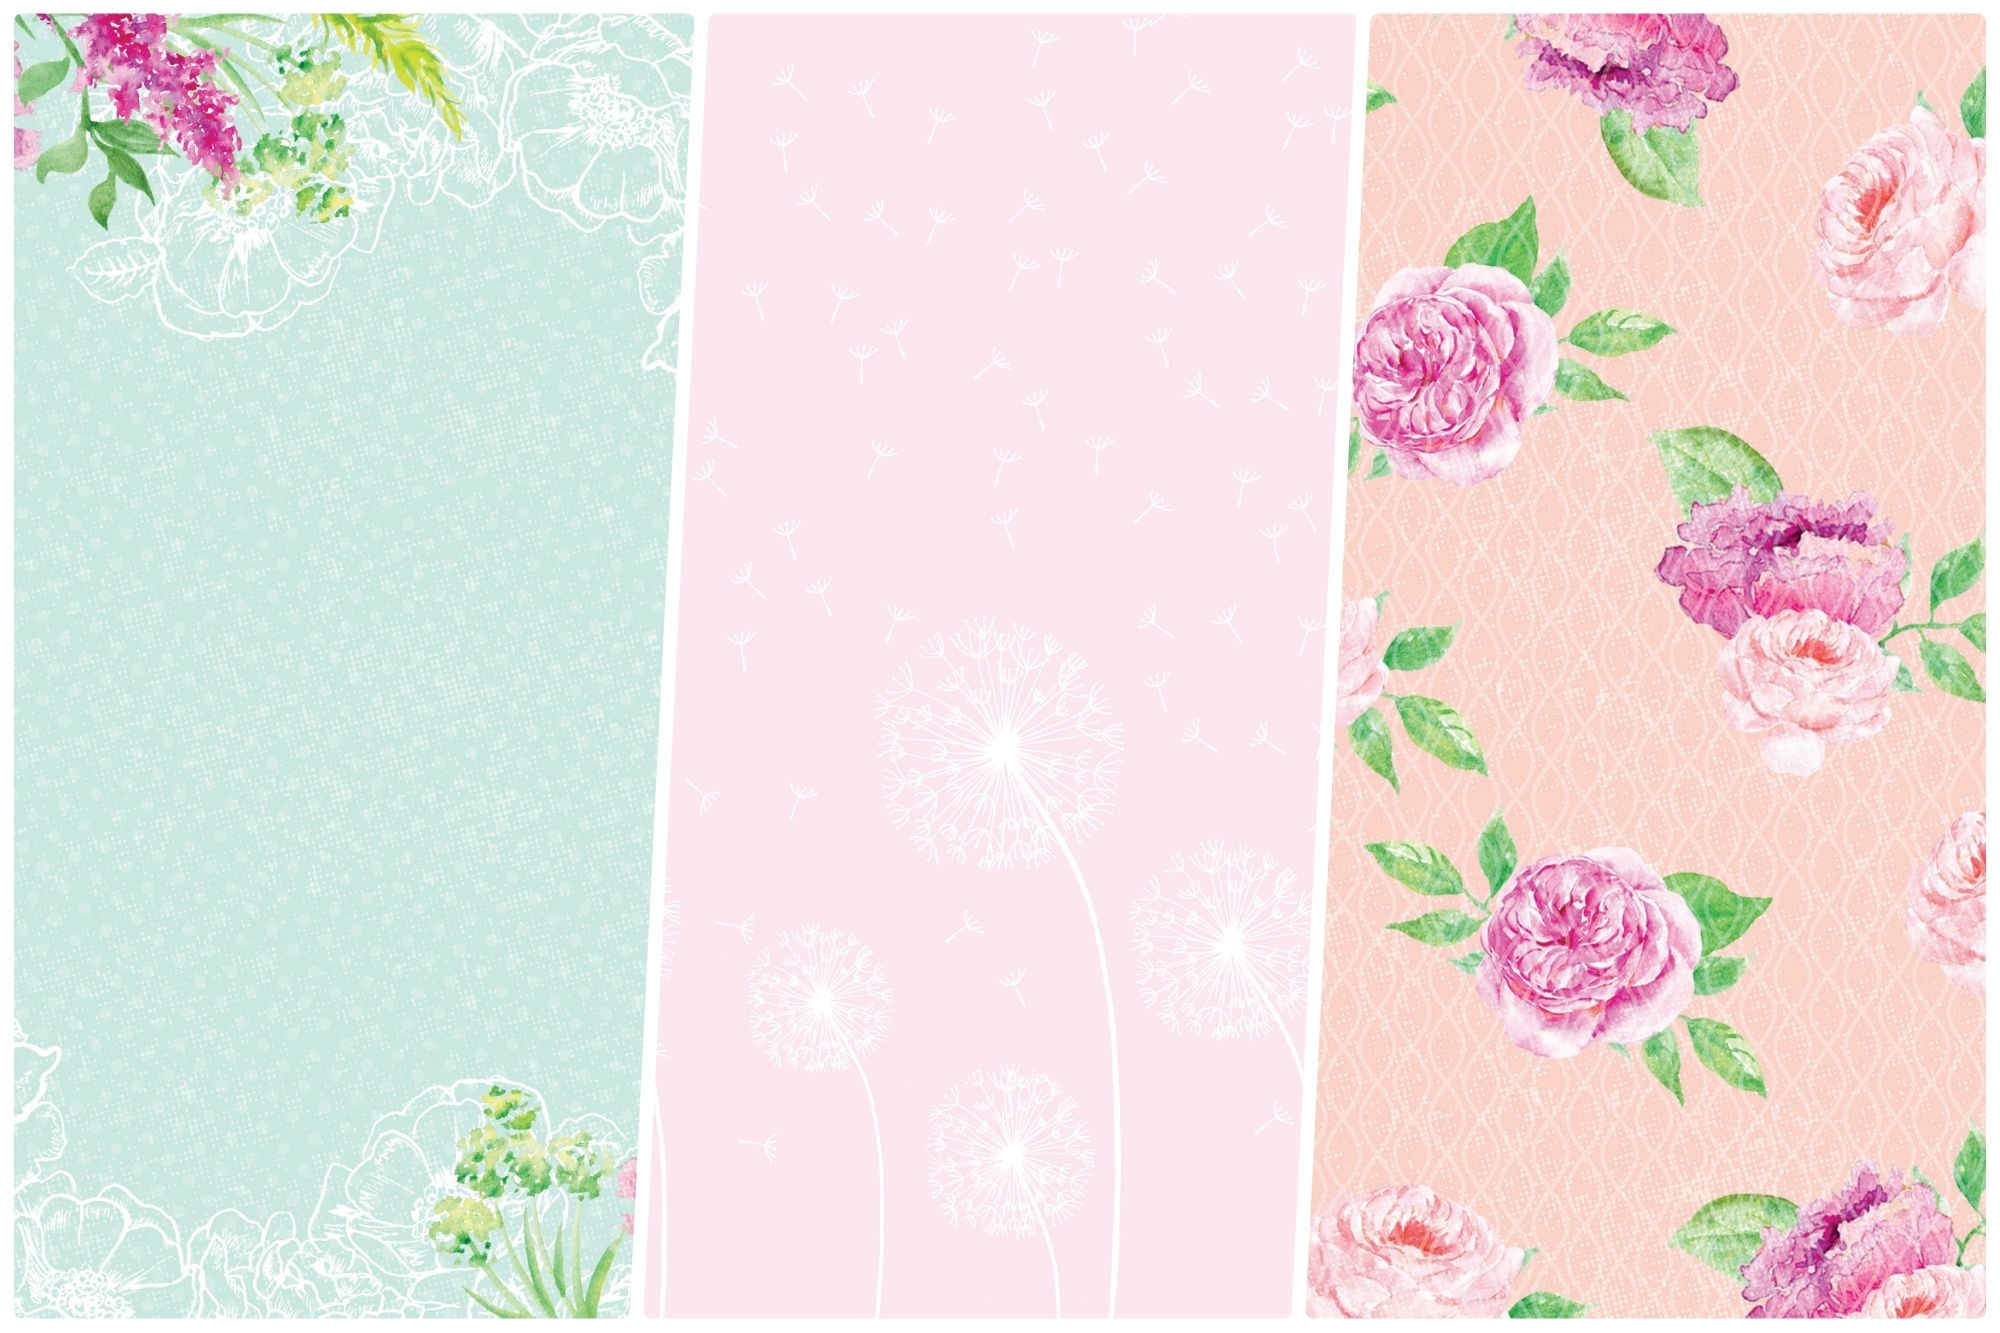 105 FREE Printable Papers - Free Printable Backgrounds For Paper